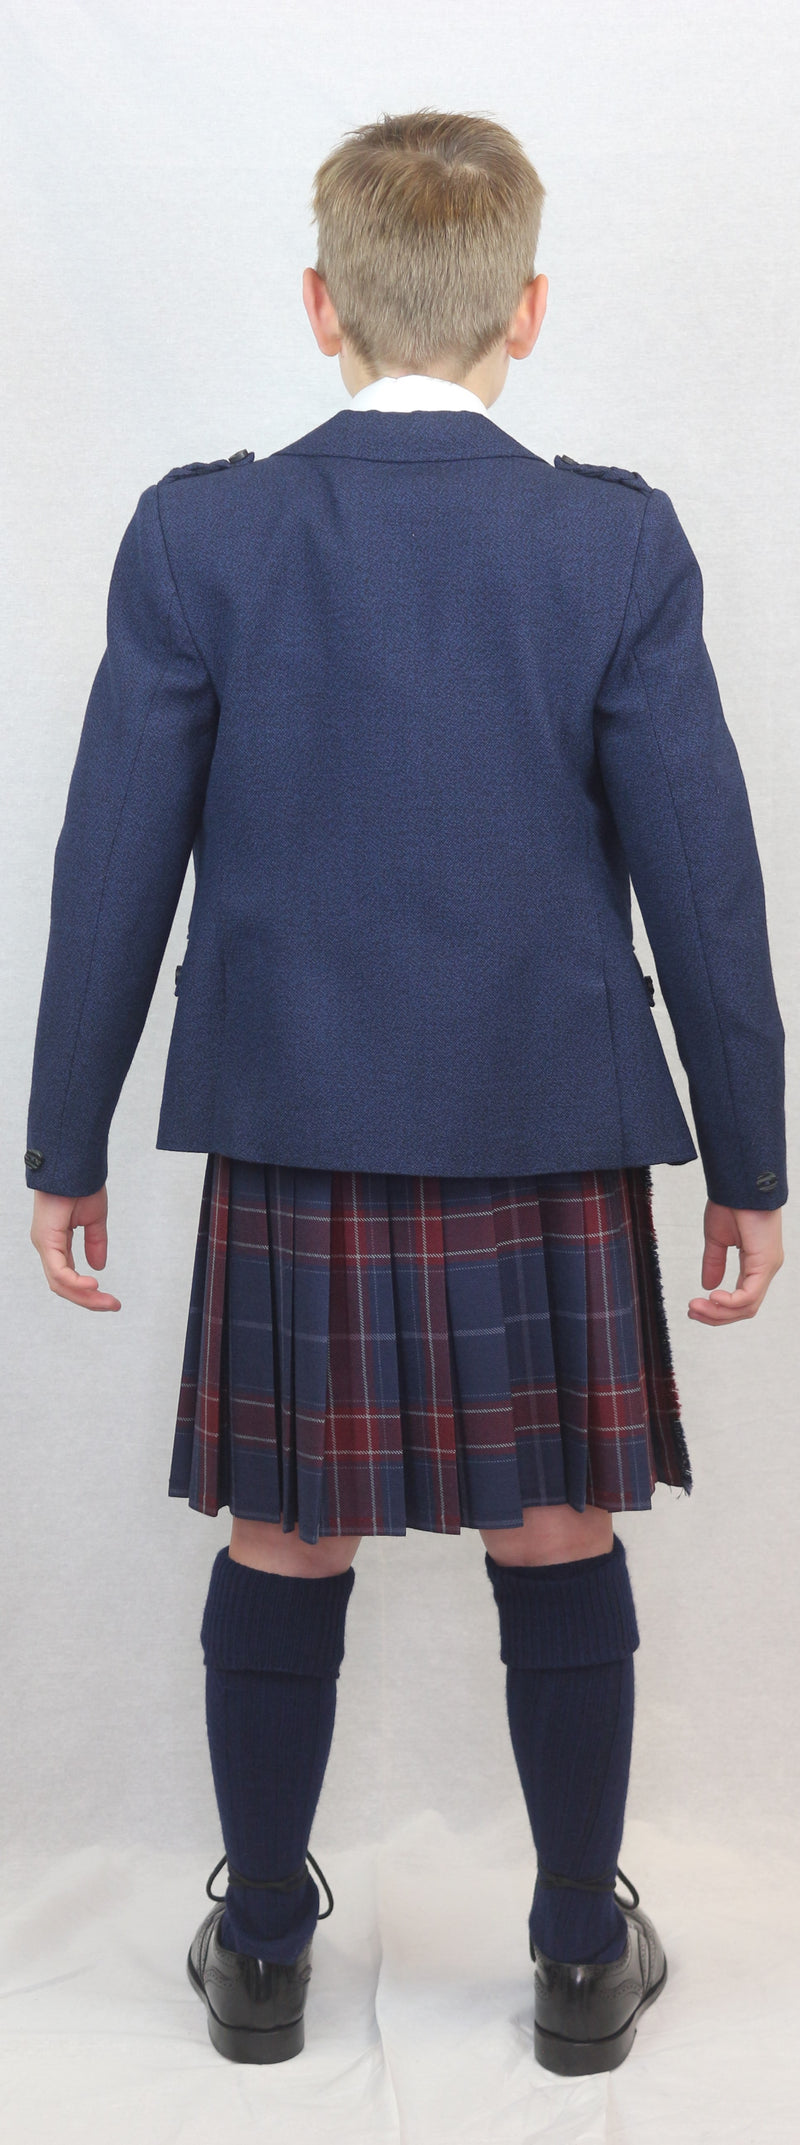 Back image of Boys navy crail kilt hire outfit with Queen of the South tartan. Available from Anderson Kilts Dumfries